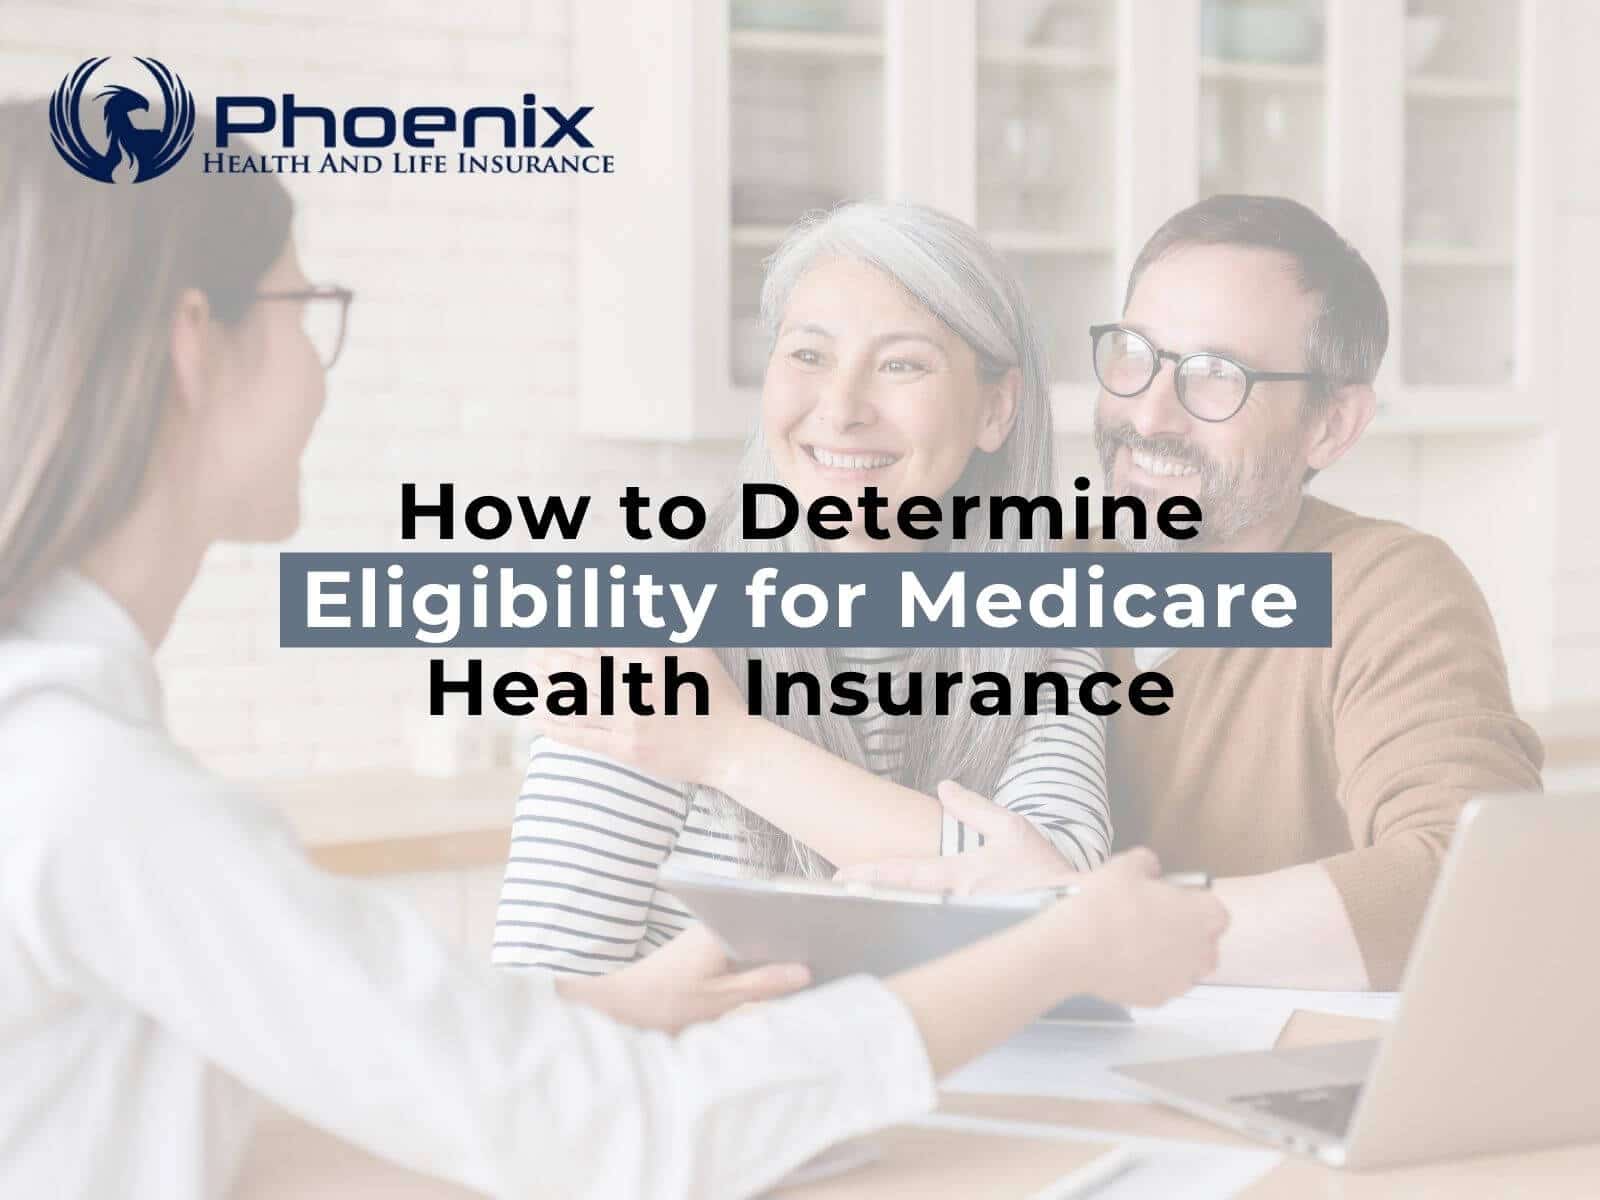 How to Determine Eligibility for Medicare Health Insurance